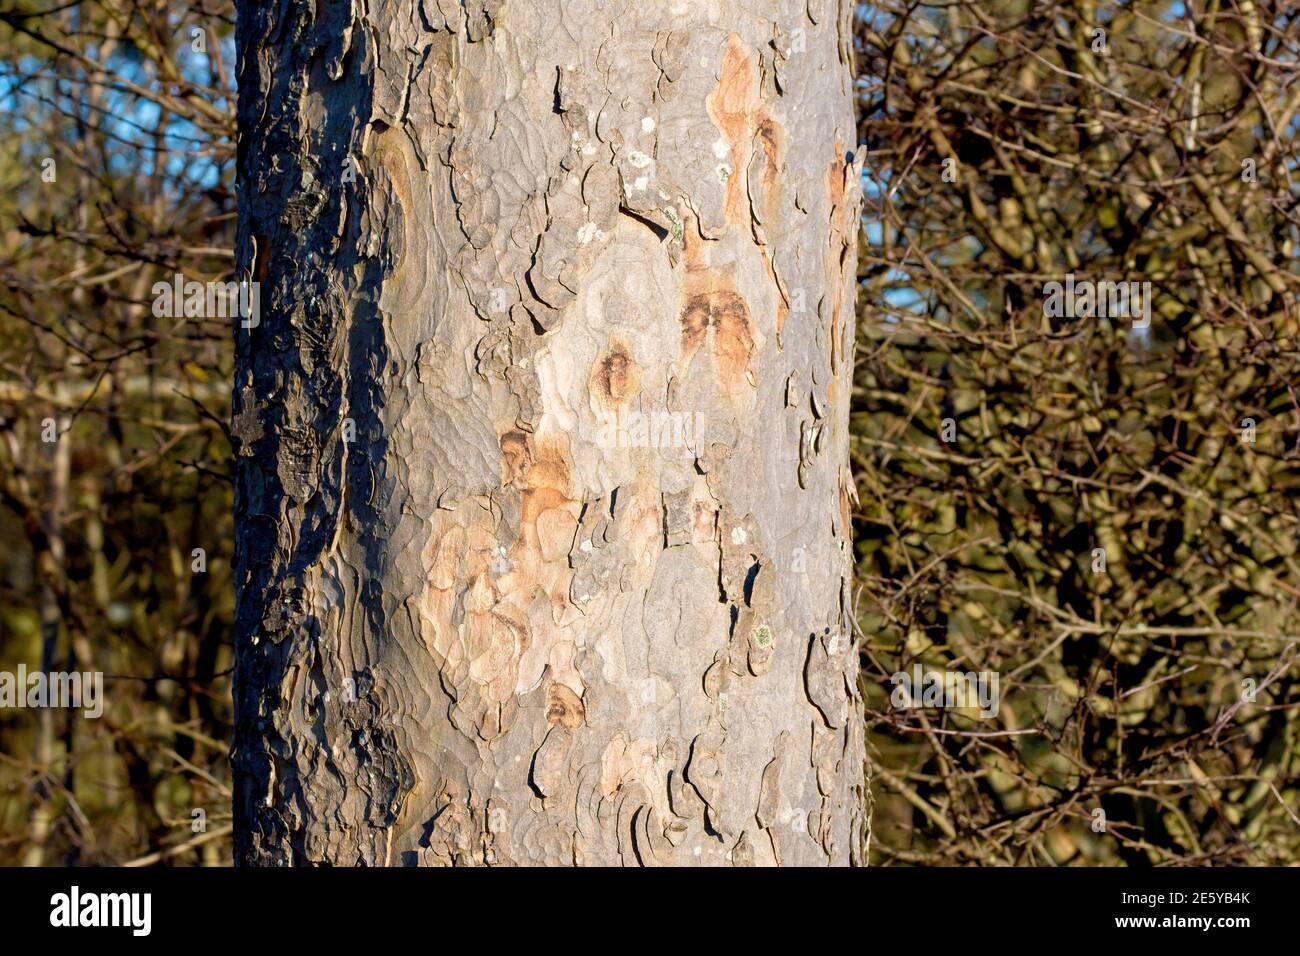 Sycamore (acer pseudoplatanus), close up of a tree trunk showing the texture and detail in the bark. Stock Photo